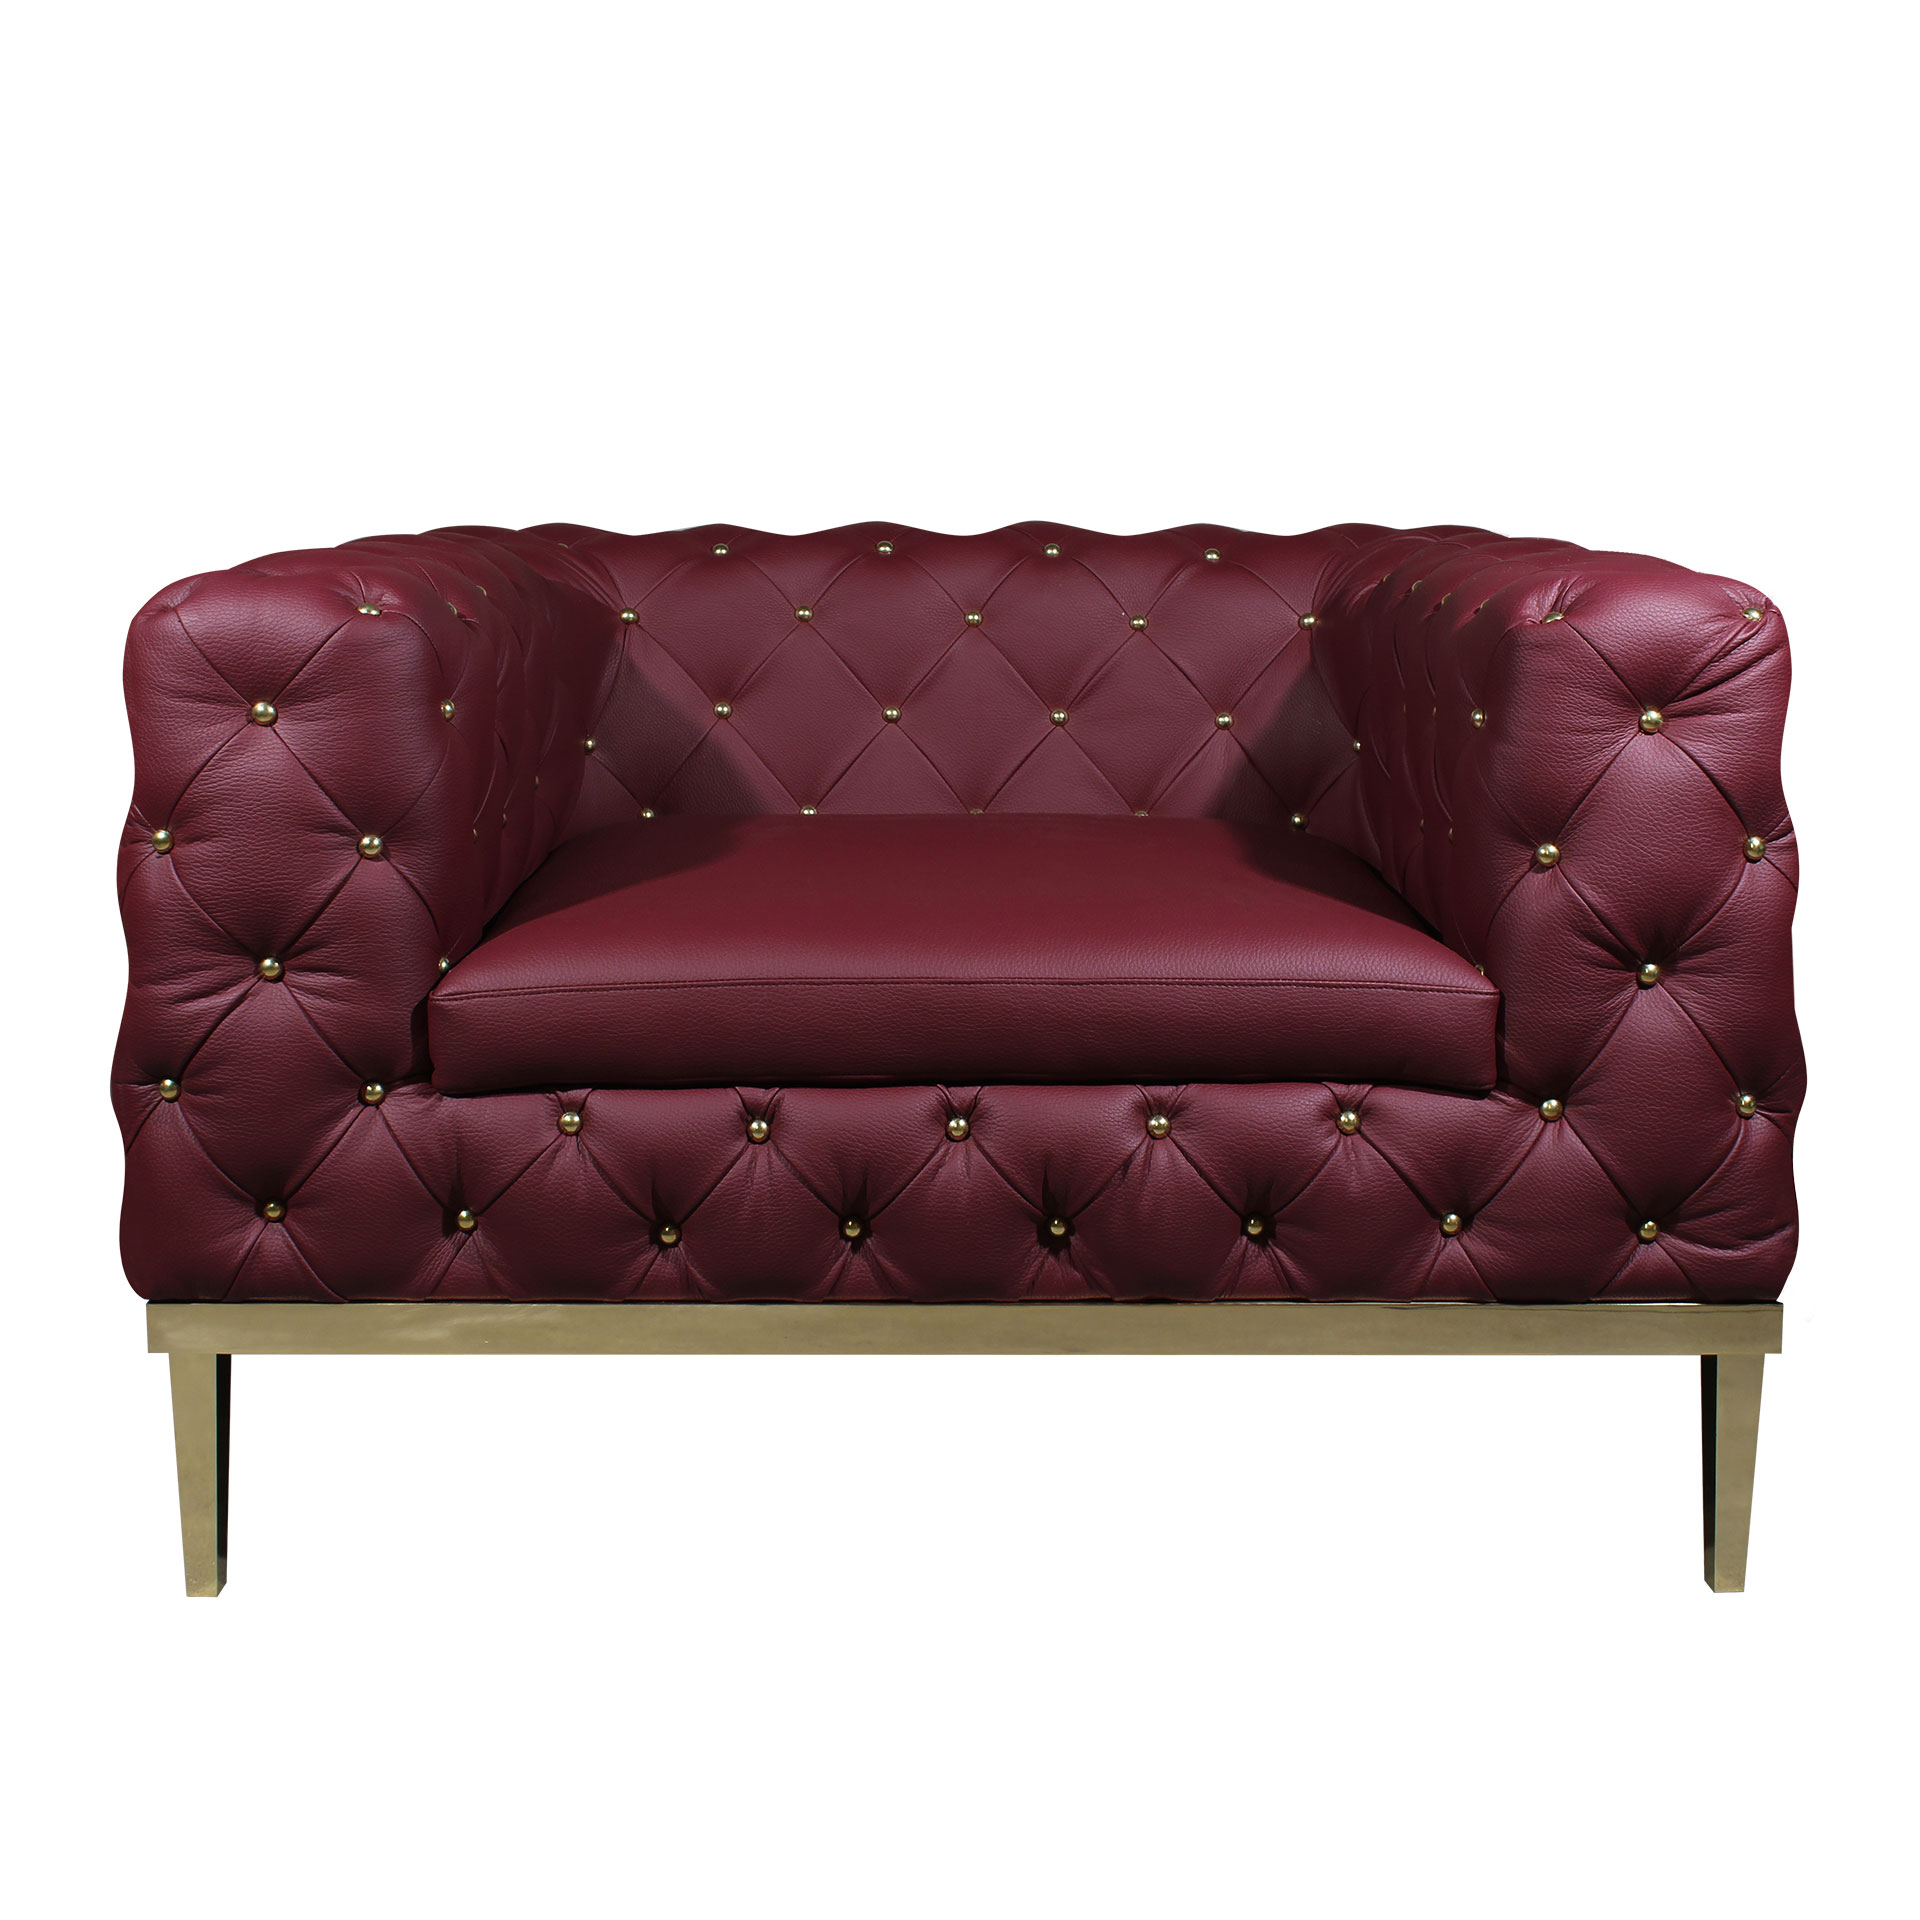 Brodway armchair